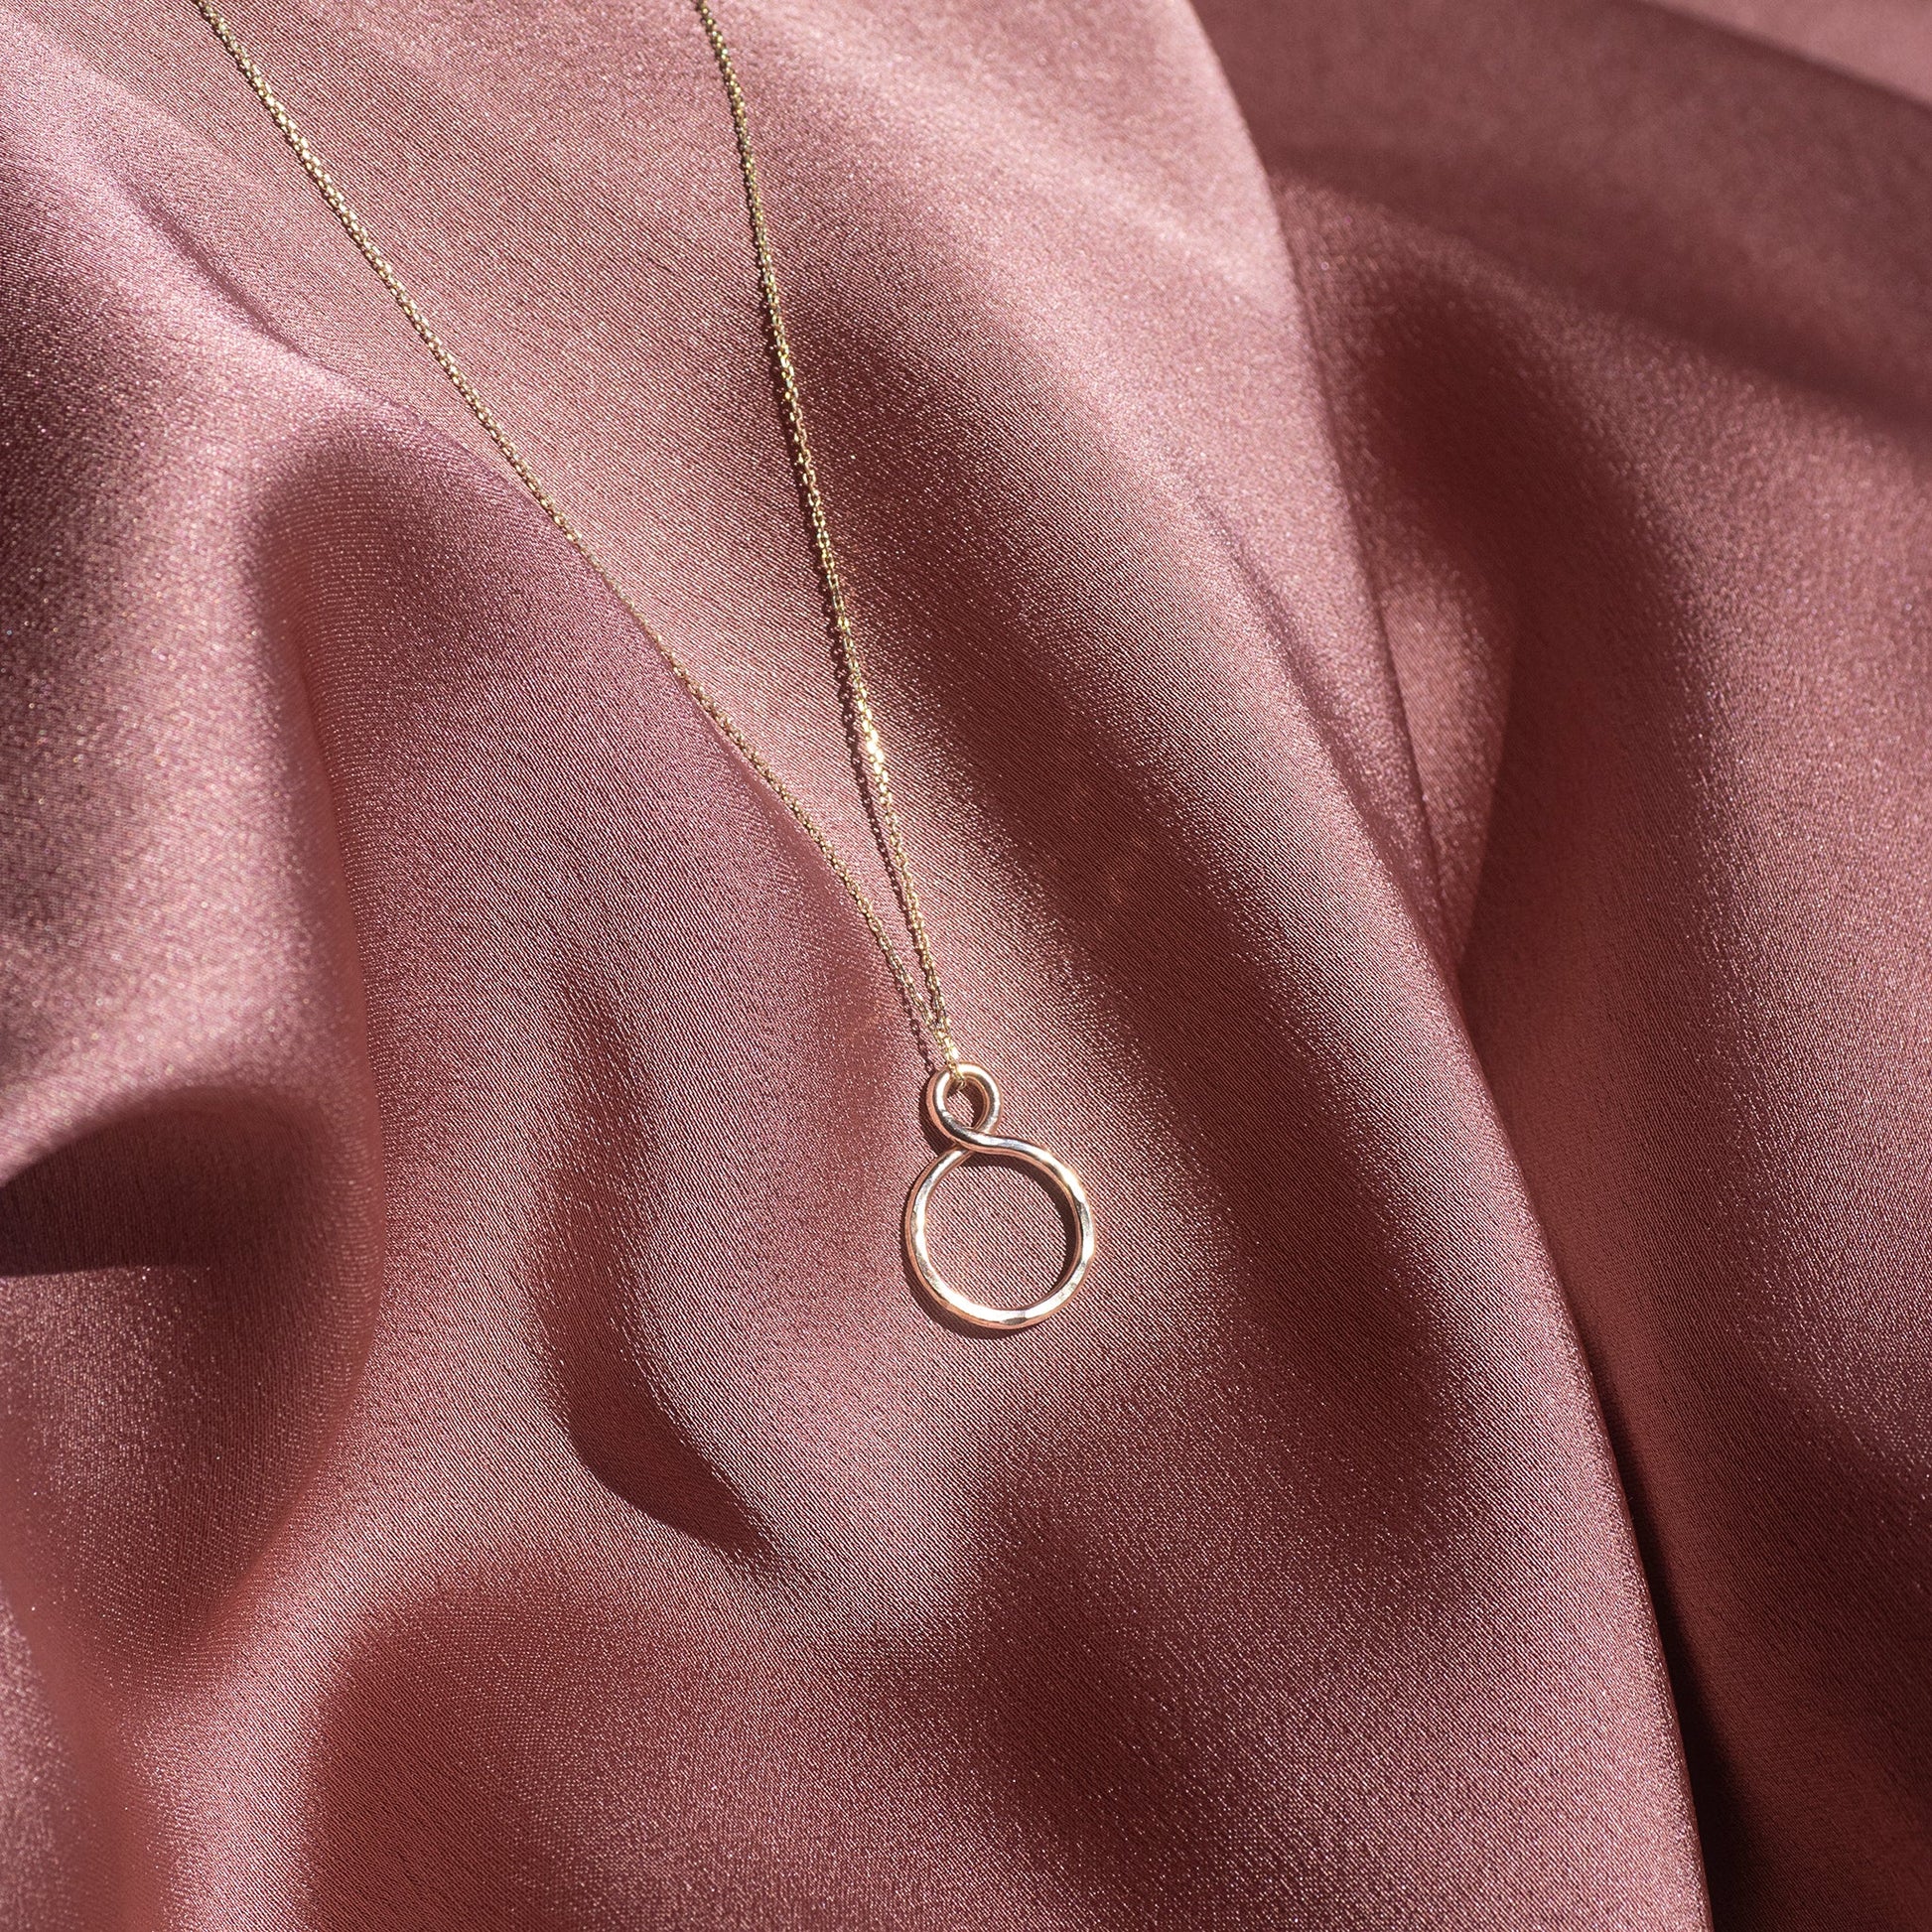 Gift for Niece - Tiny Infinity Necklace - 9kt Gold Media